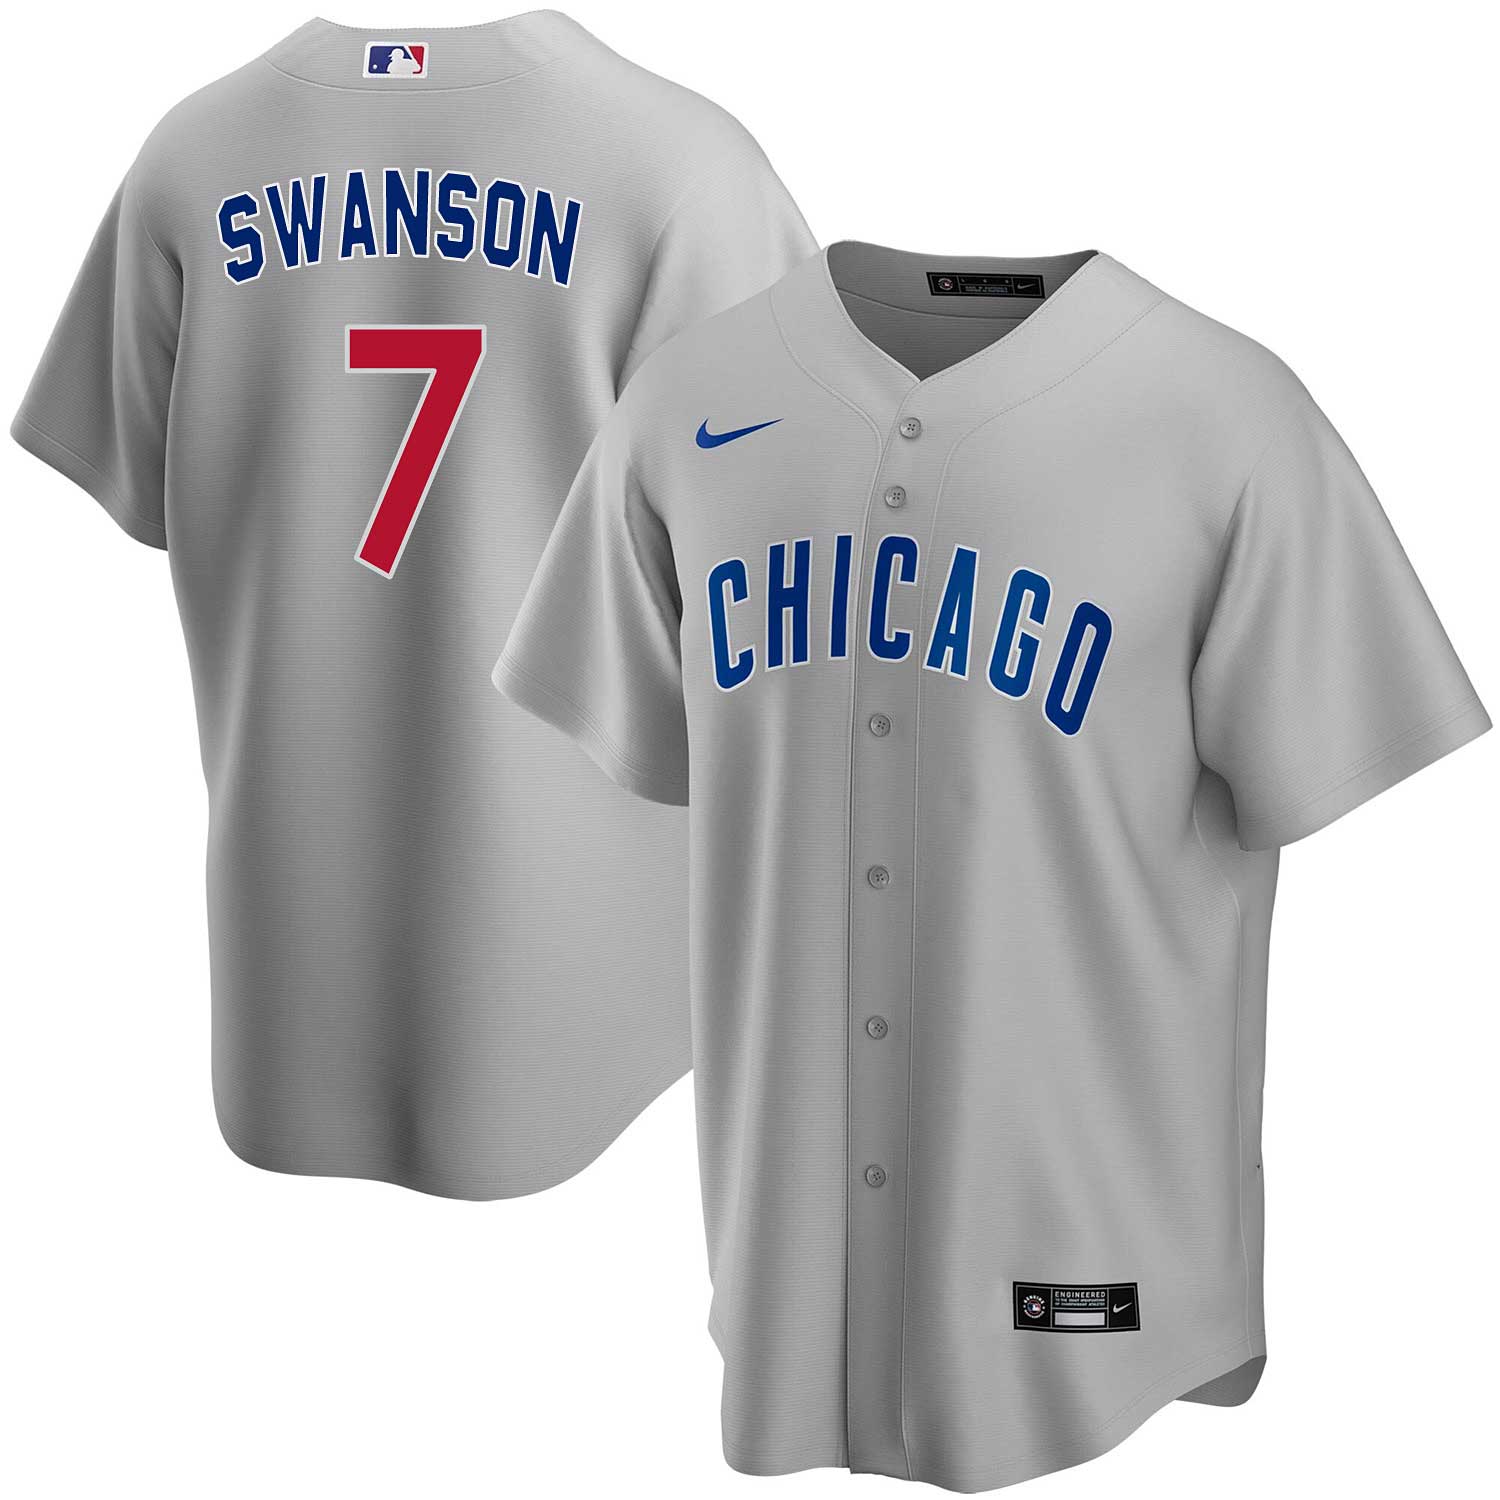 Chicago Cubs Dansby Swanson Nike Name & Number T-Shirt Small